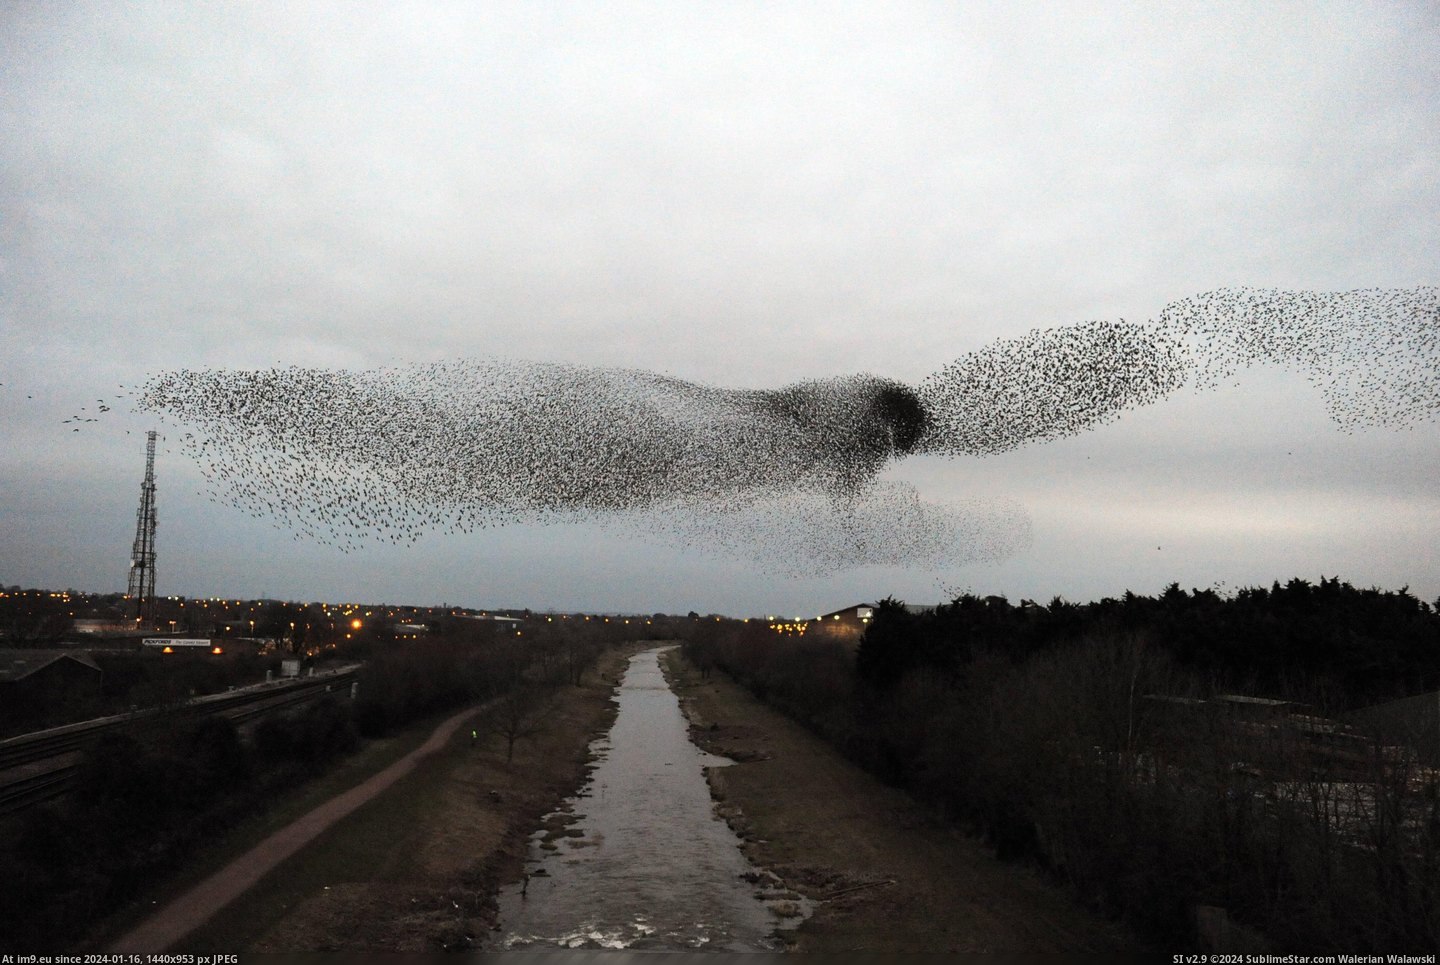 #Huge #England #Shape #Starlings #Taunton #Form #Hawk #Flock [Pics] A huge flock of starlings form the shape of a hawk in Taunton, England Pic. (Image of album My r/PICS favs))